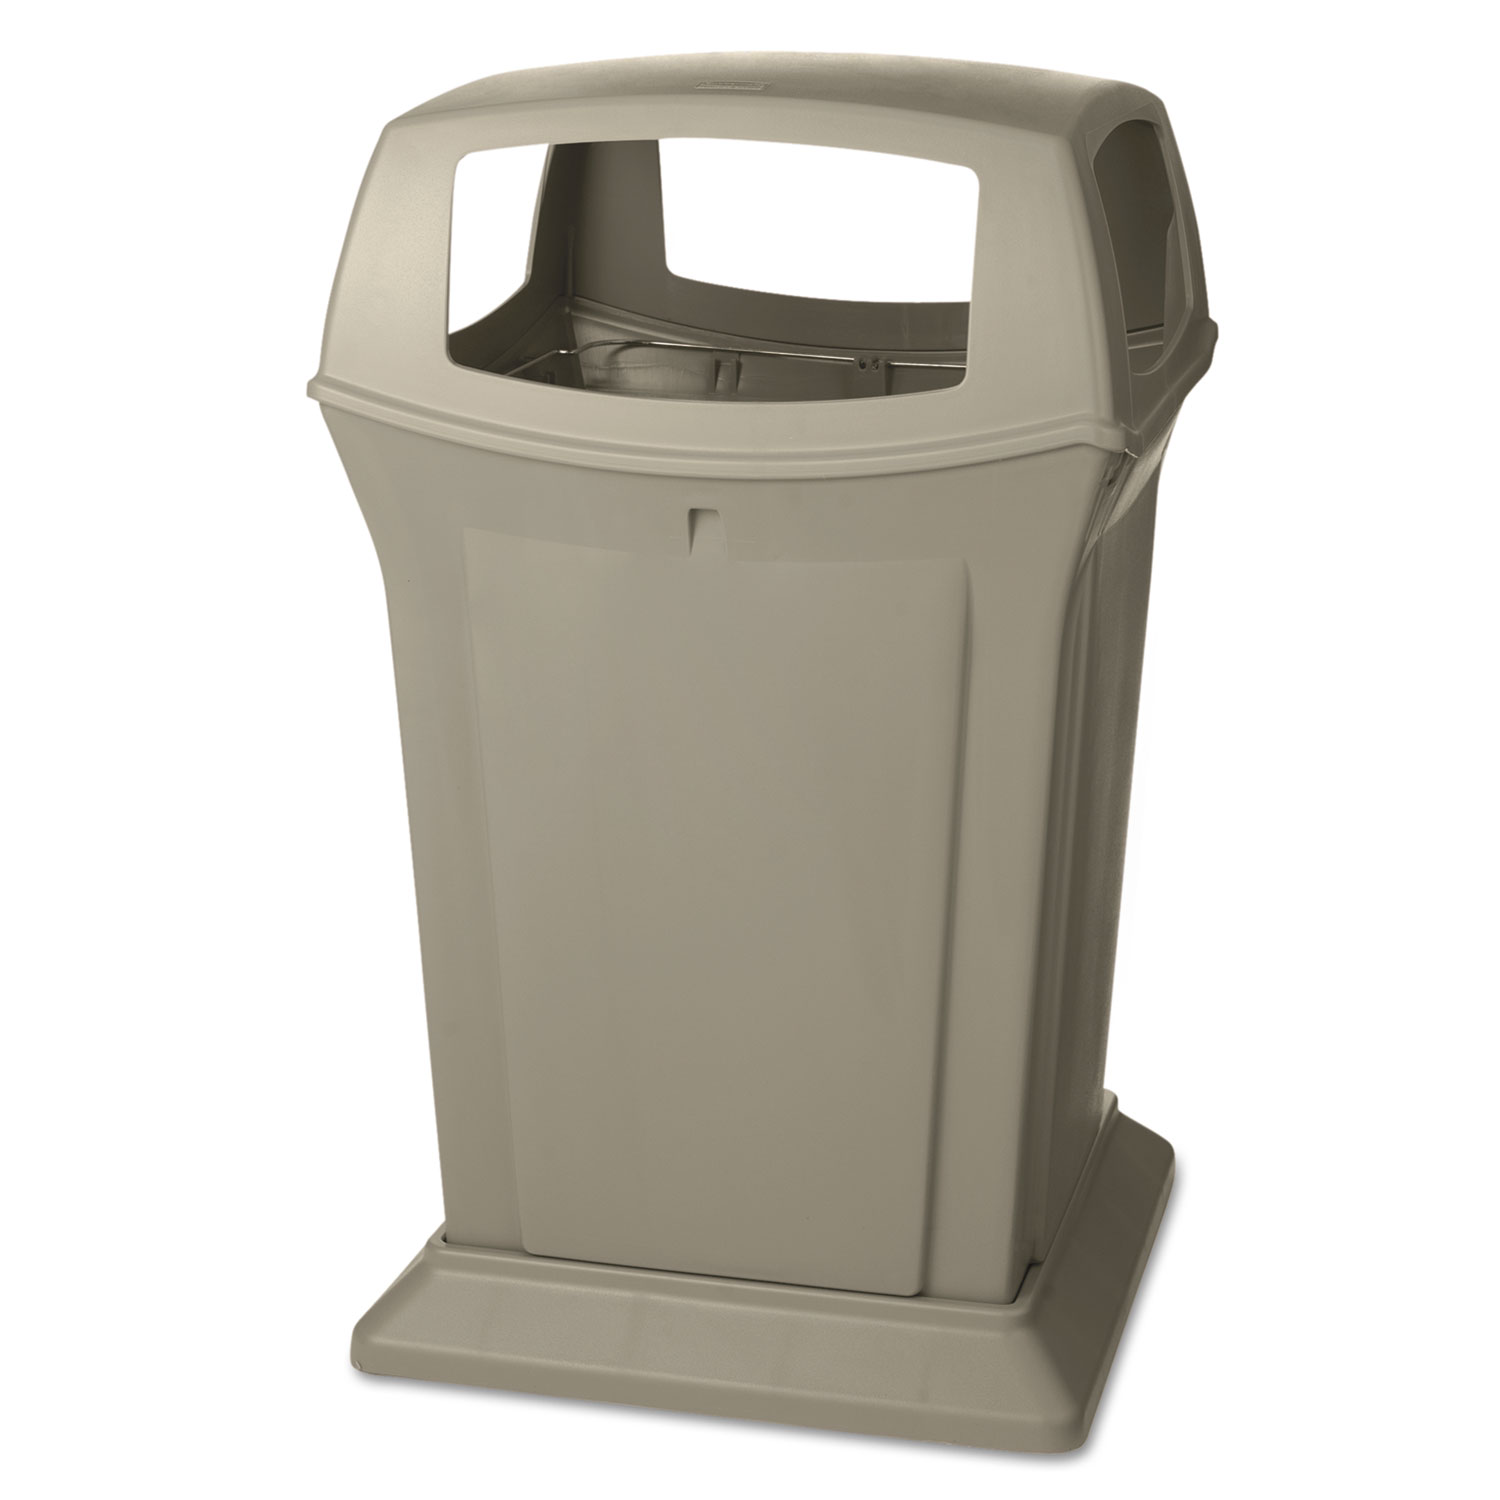  Rubbermaid Commercial FG917388BEIG Ranger Fire-Safe Container, Square, Structural Foam, 45 gal, Beige (RCP917388BEI) 